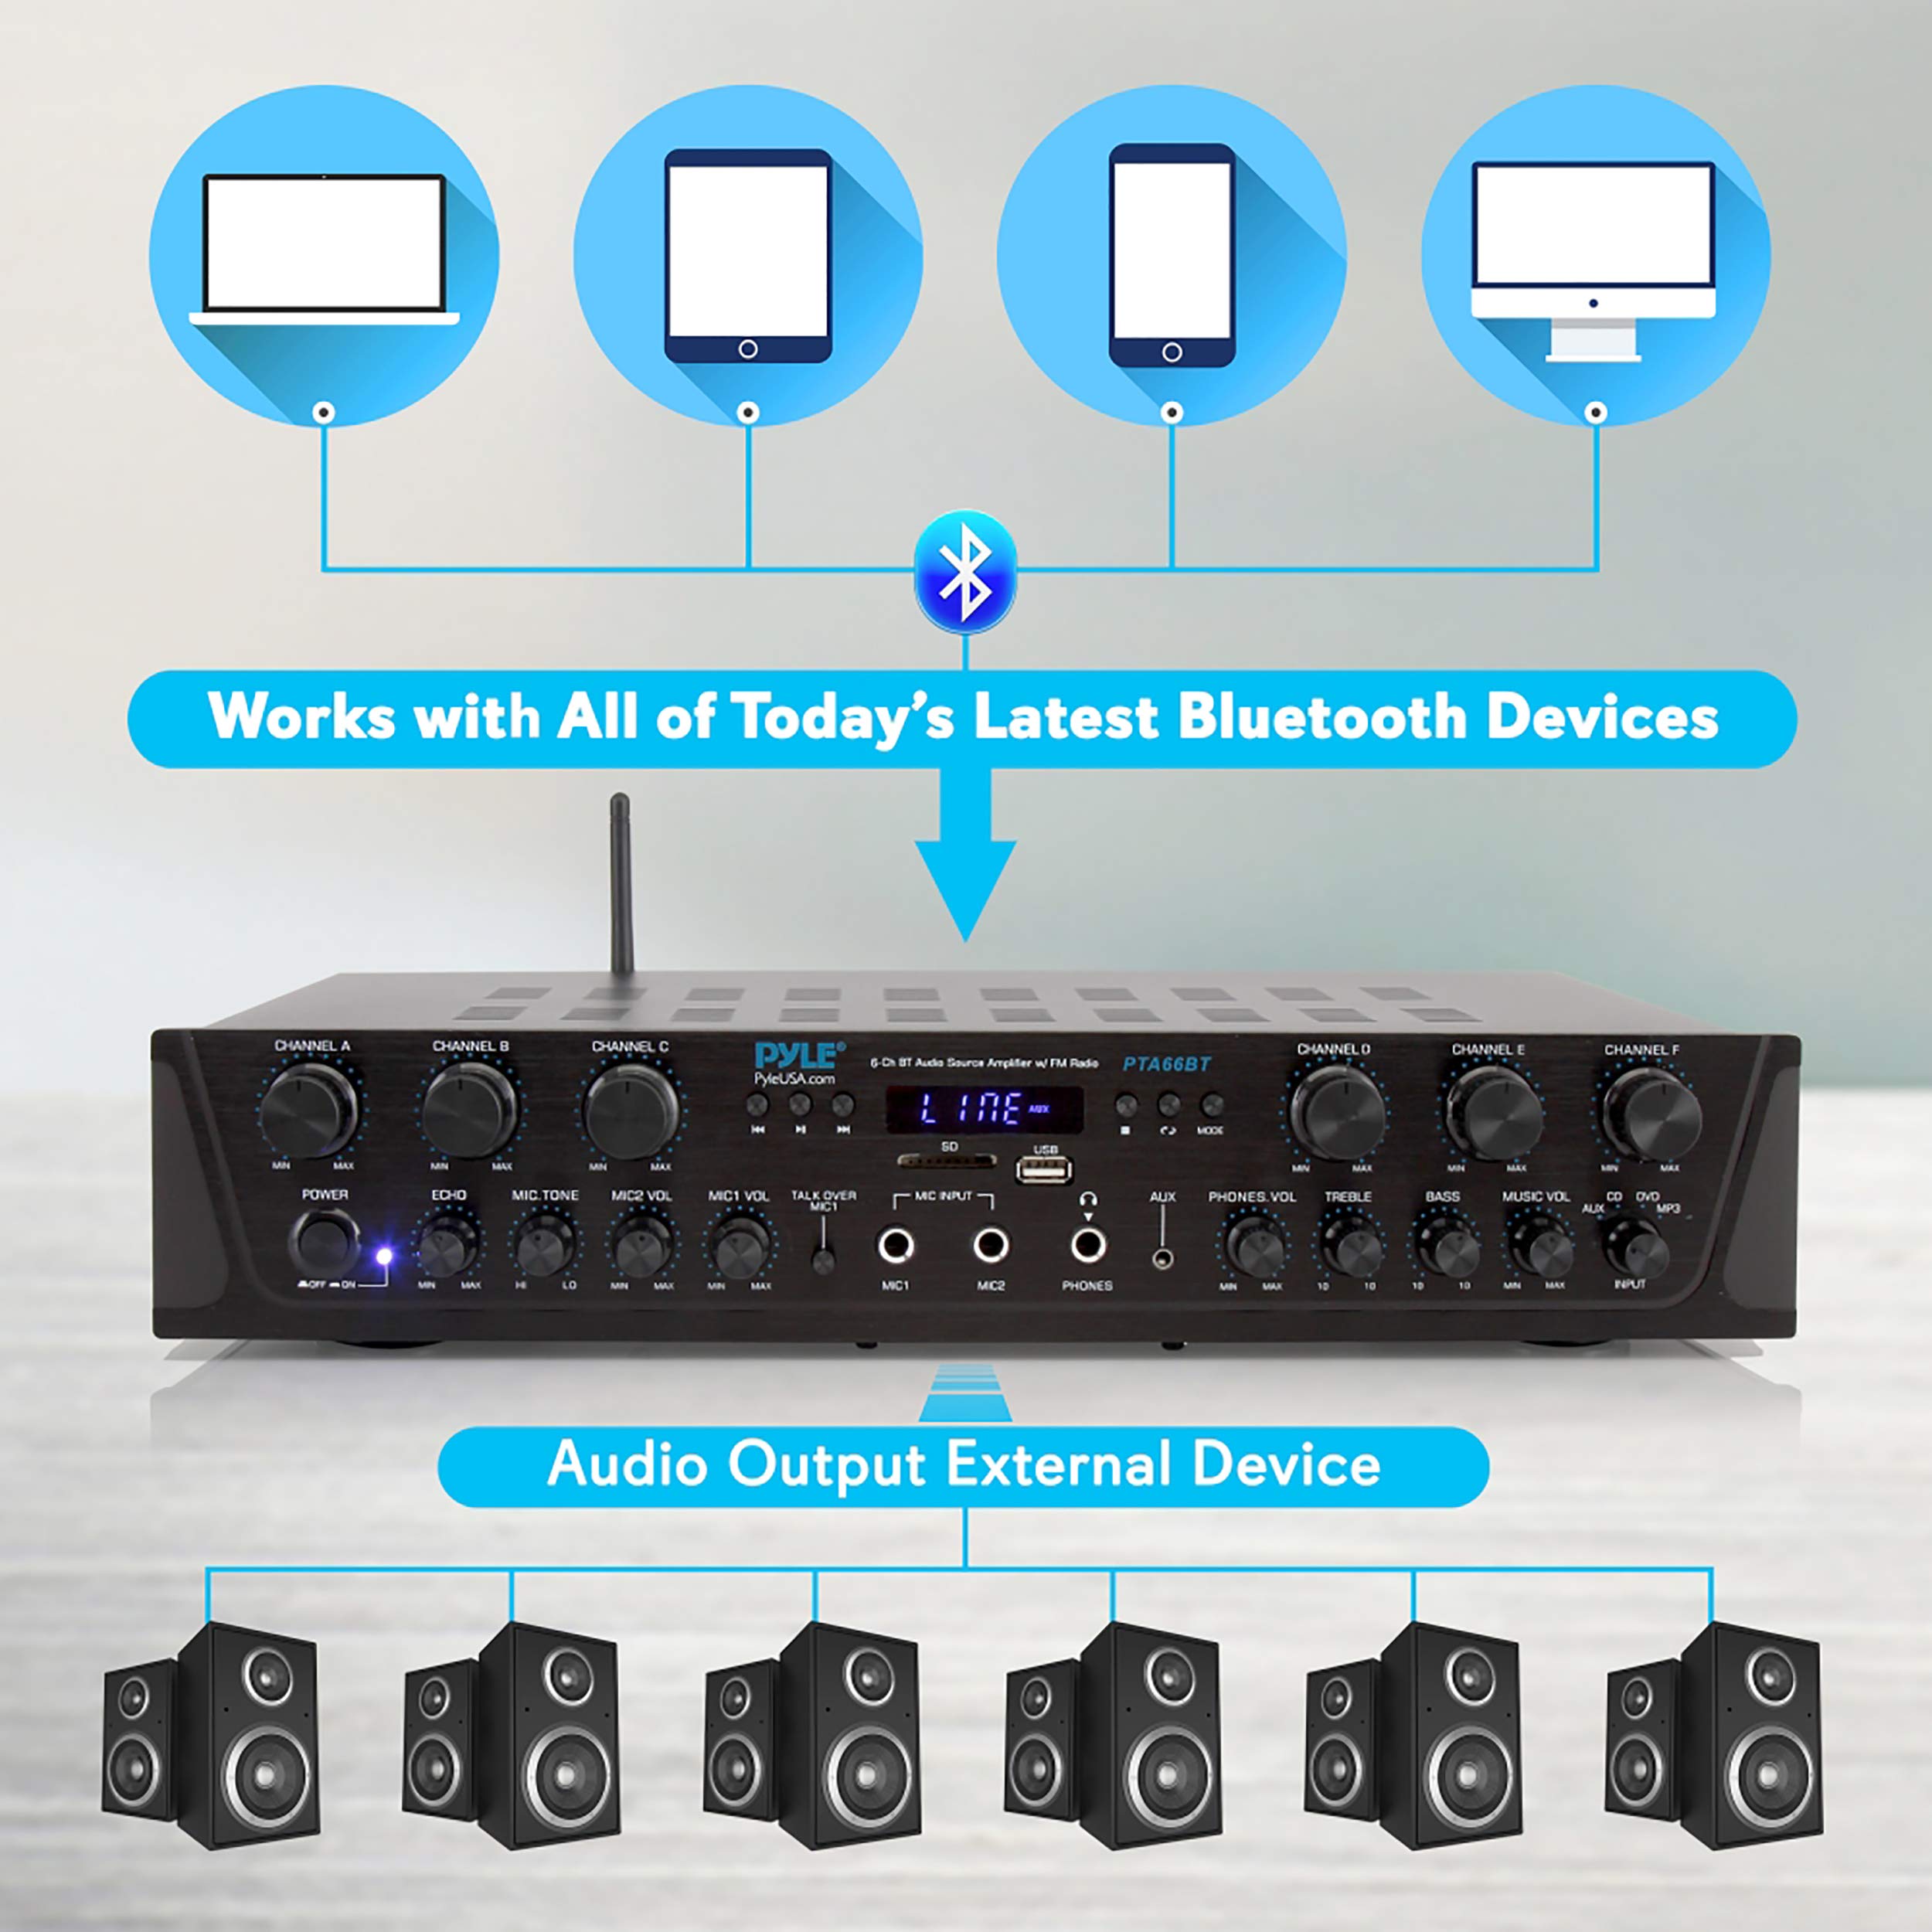 Pyle Wireless Home Audio Amplifier System-Bluetooth Compatible Sound Stereo Receiver Amp - 6 Channel 600Watt Power, Digital LCD, Headphone Jack, 1/4'' Microphone in USB SD AUX RCA FM Radio-PTA66BT.5